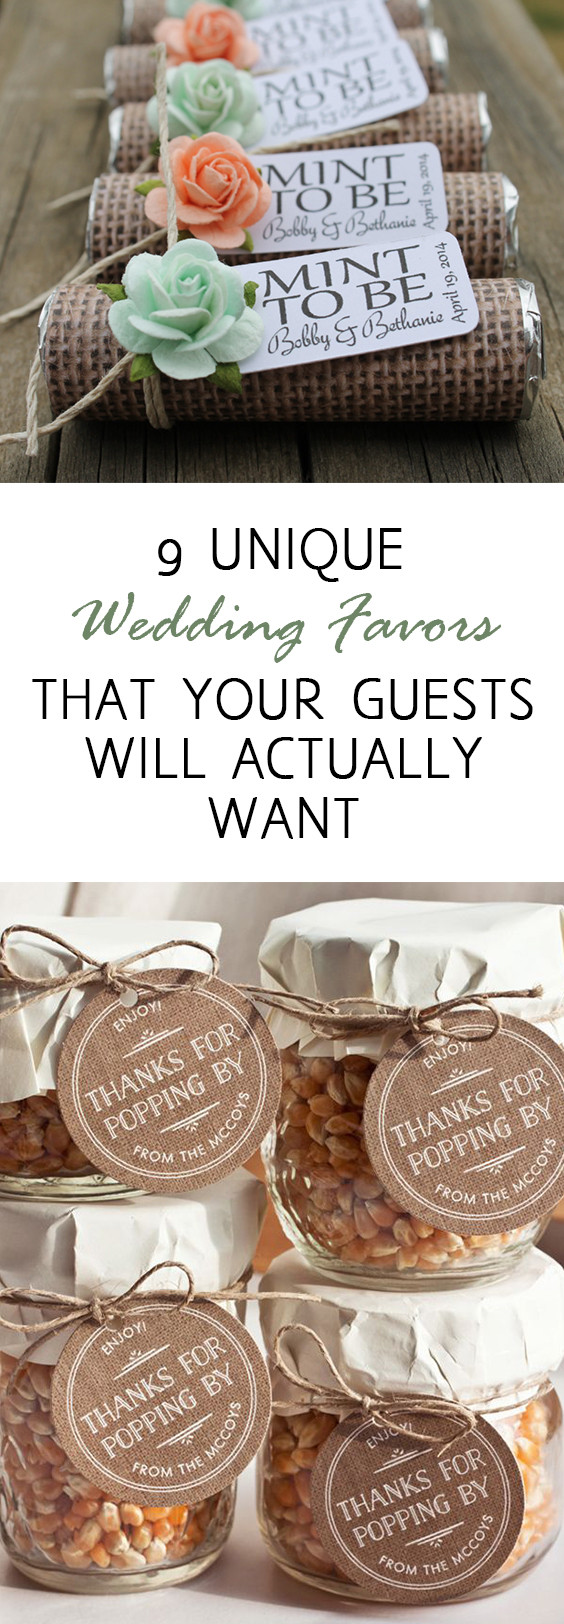 Cheap Wedding Party Favors
 9 Unique Wedding Favors that Your Guests Will Actually